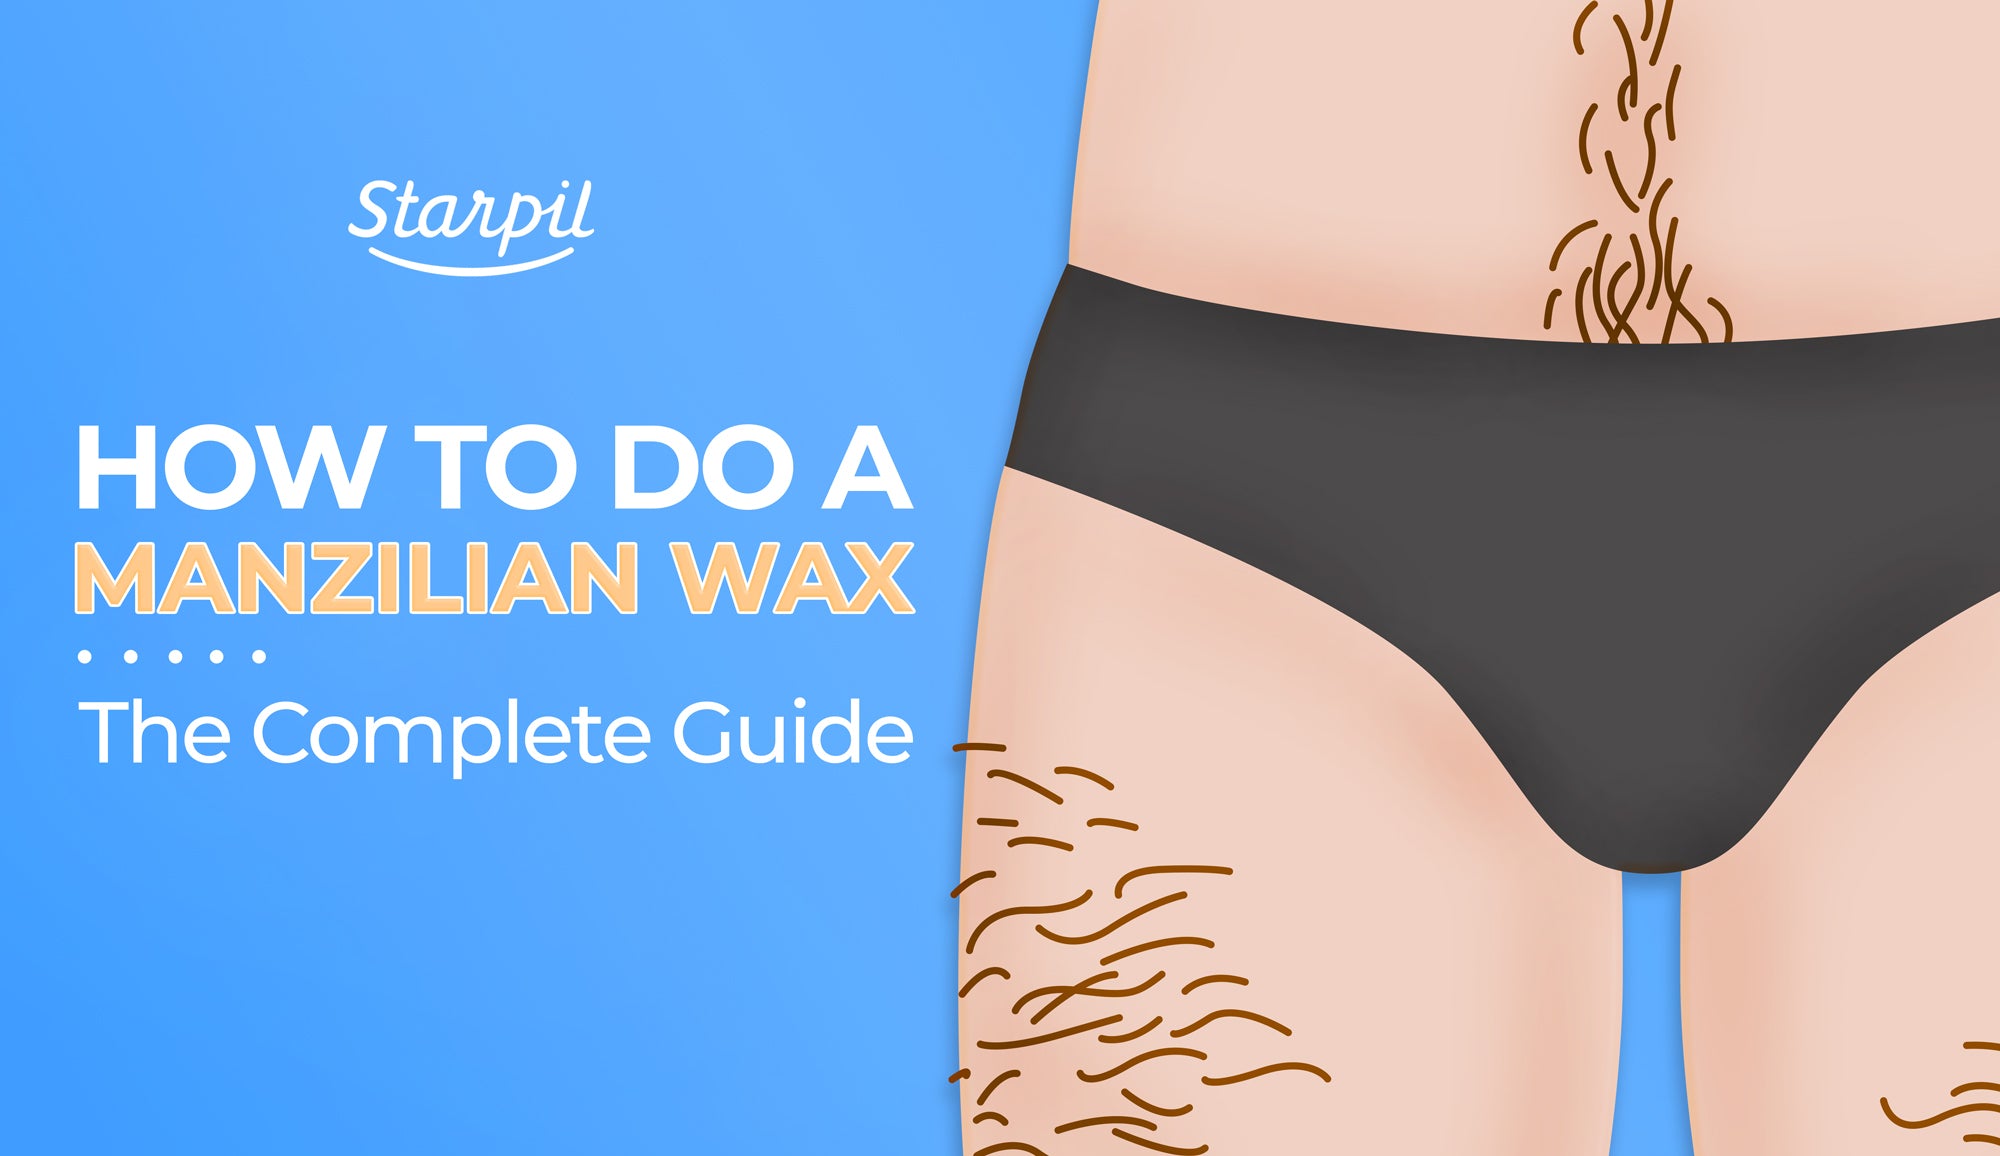 How to Do a Manzilian Wax - The Complete Guide